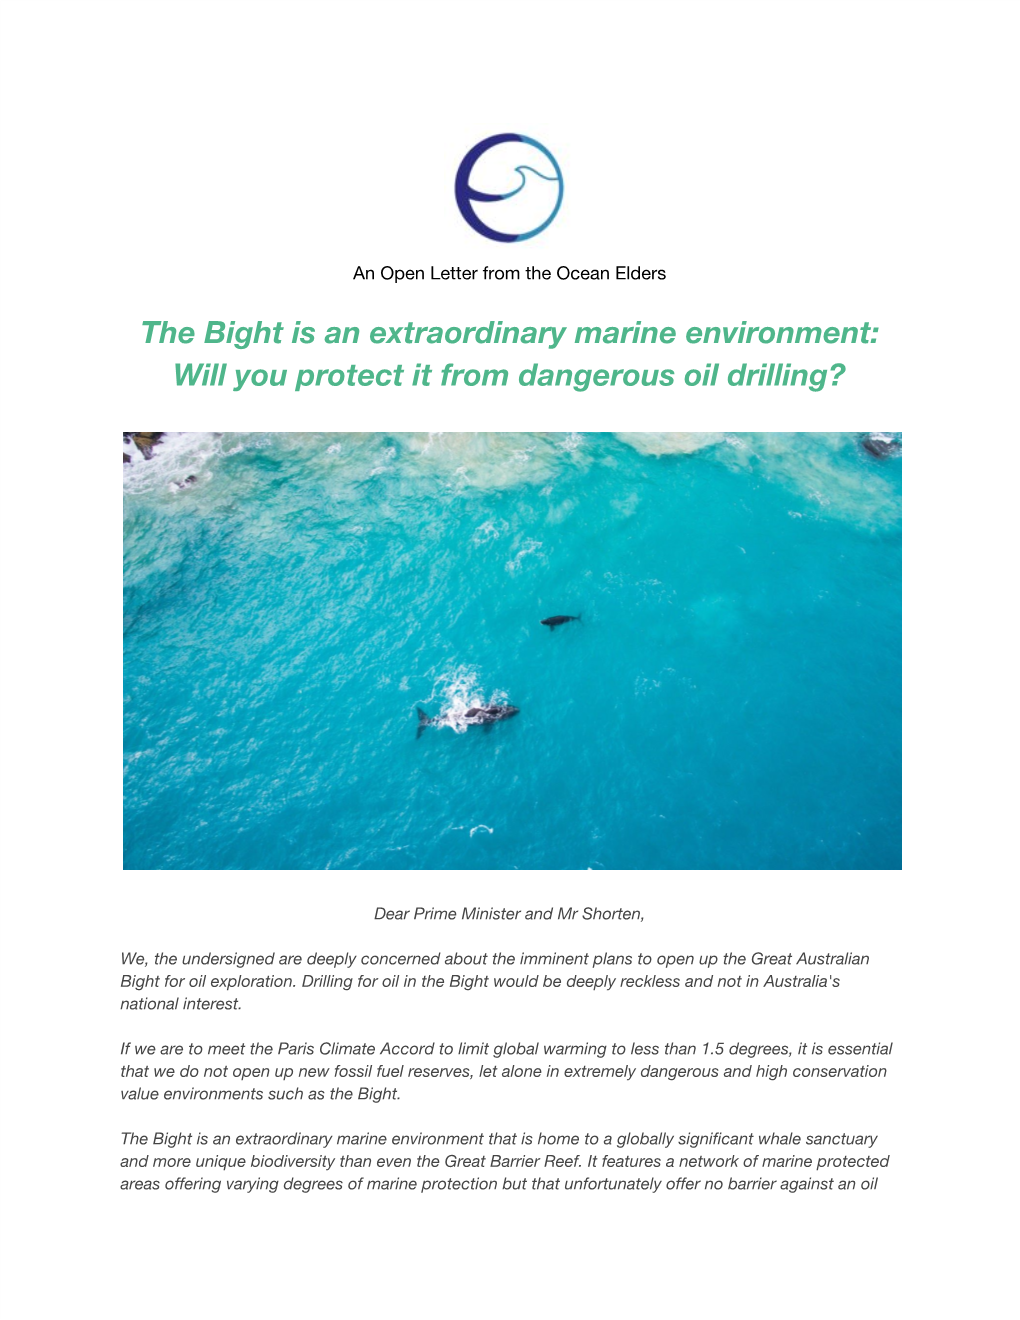 The Bight Is an Extraordinary Marine Environment: Will You Protect It from Dangerous Oil Drilling?